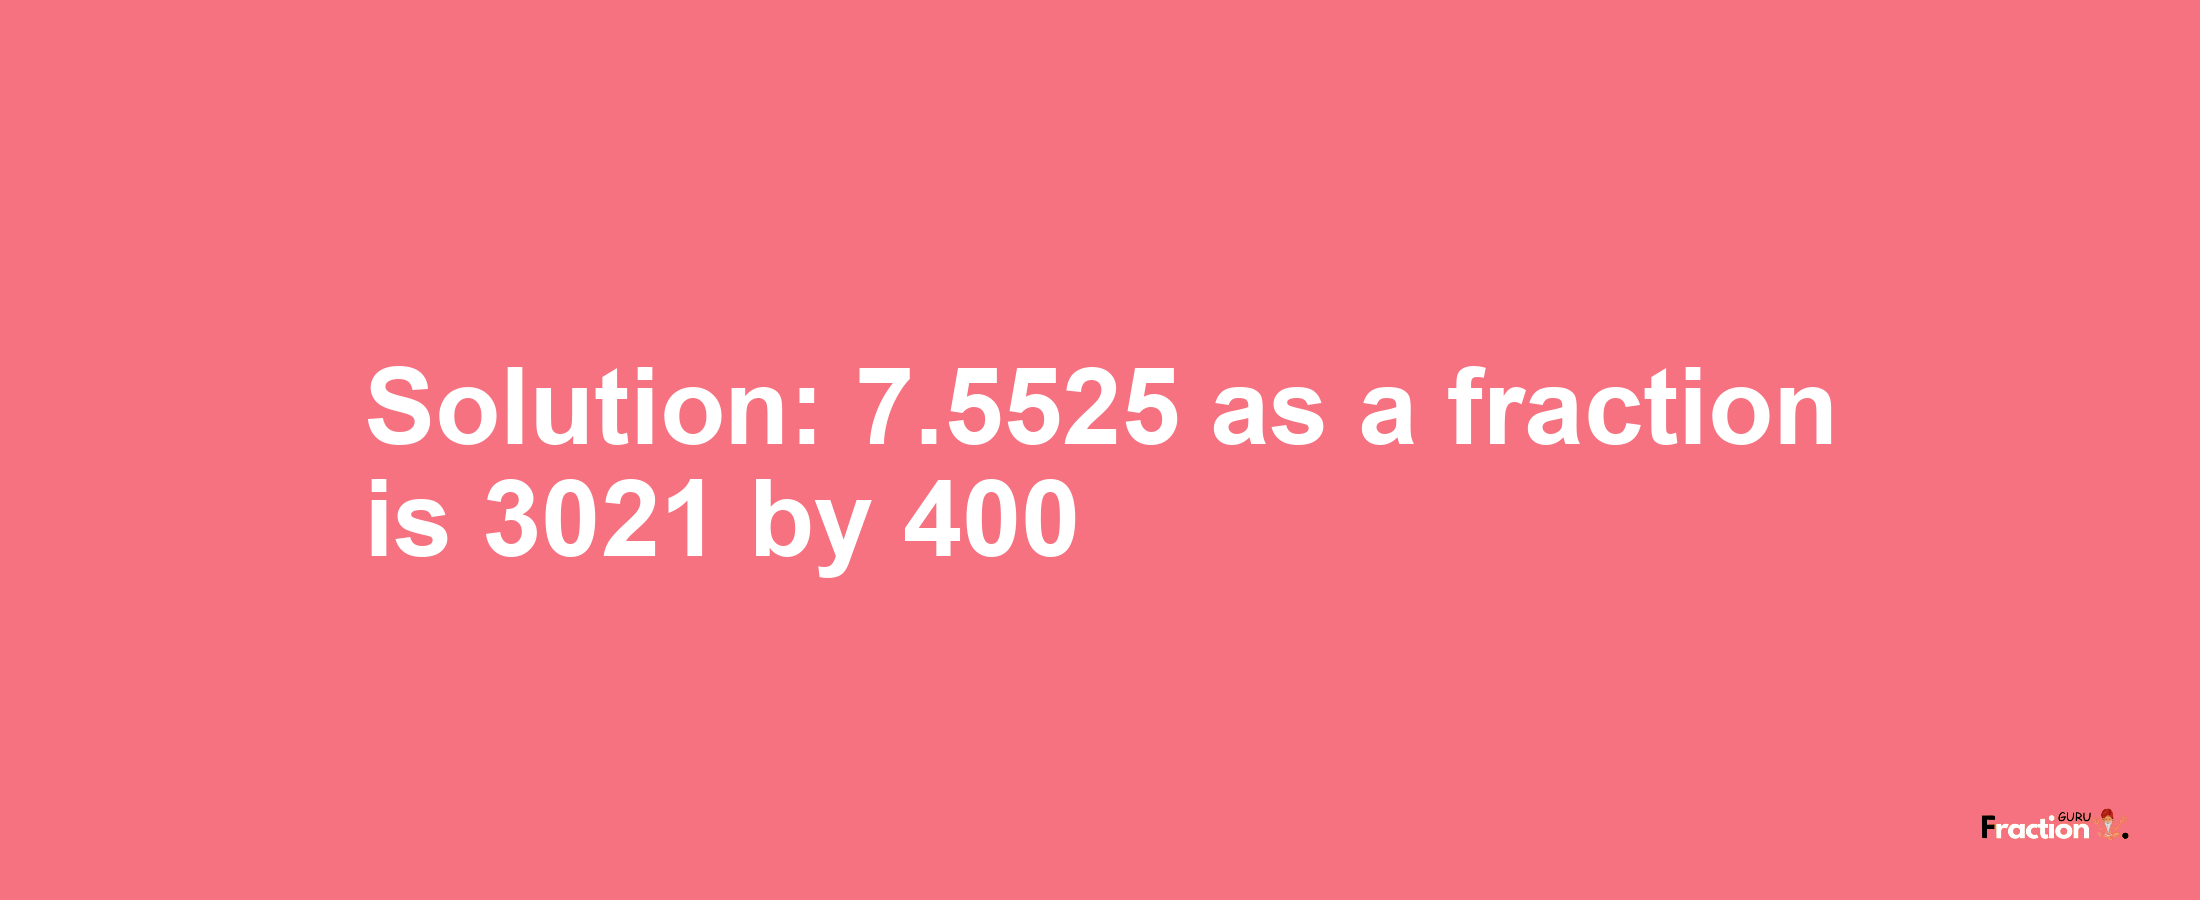 Solution:7.5525 as a fraction is 3021/400